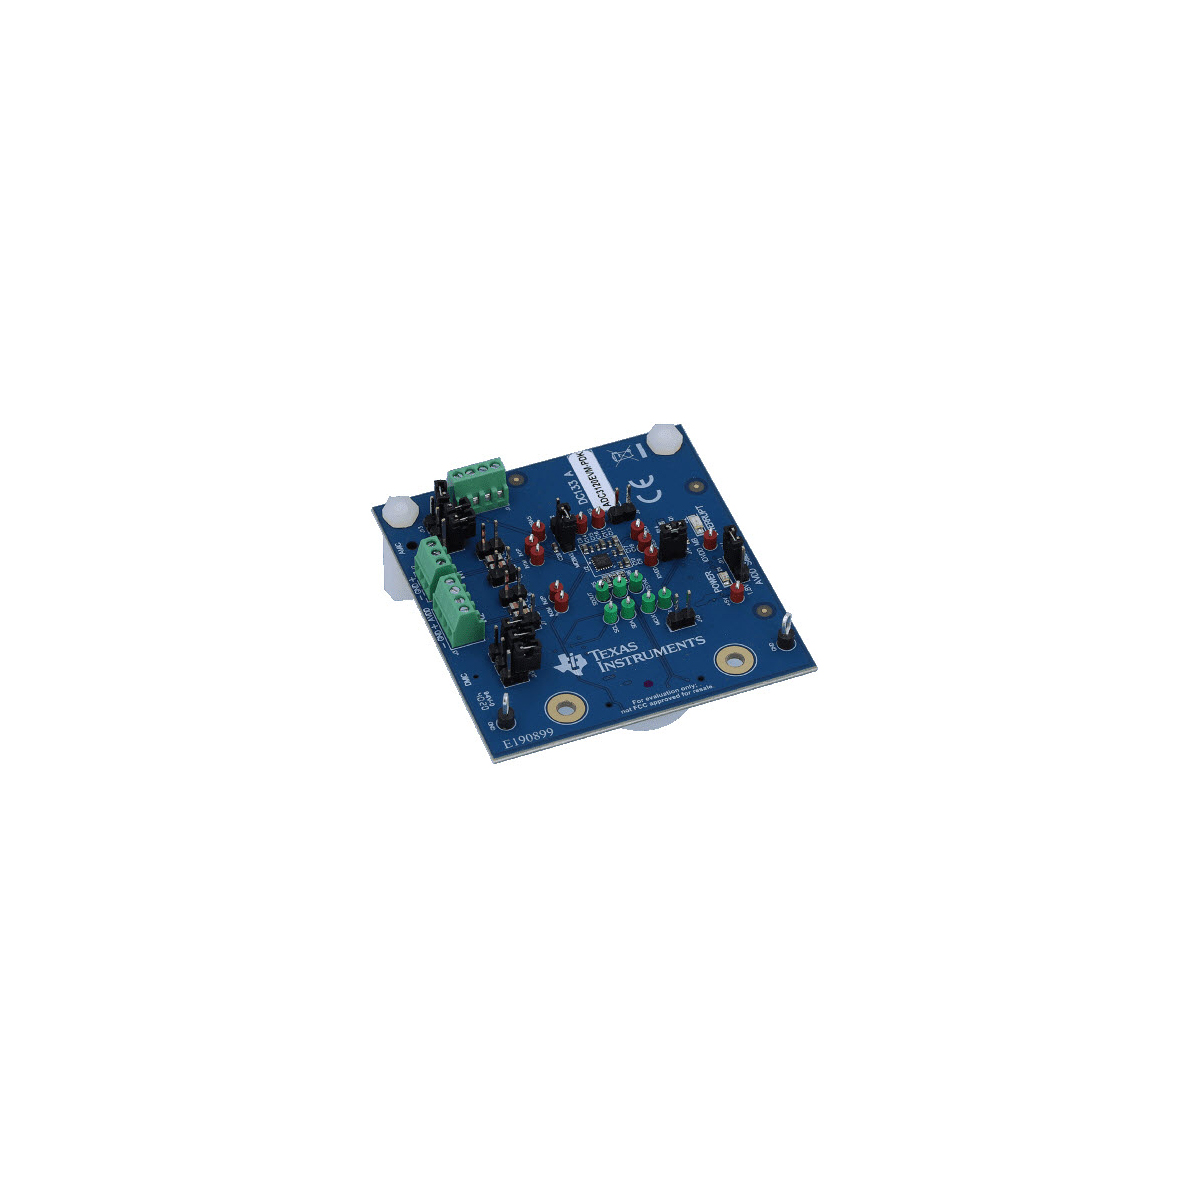 the part number is ADC3120EVM-PDK